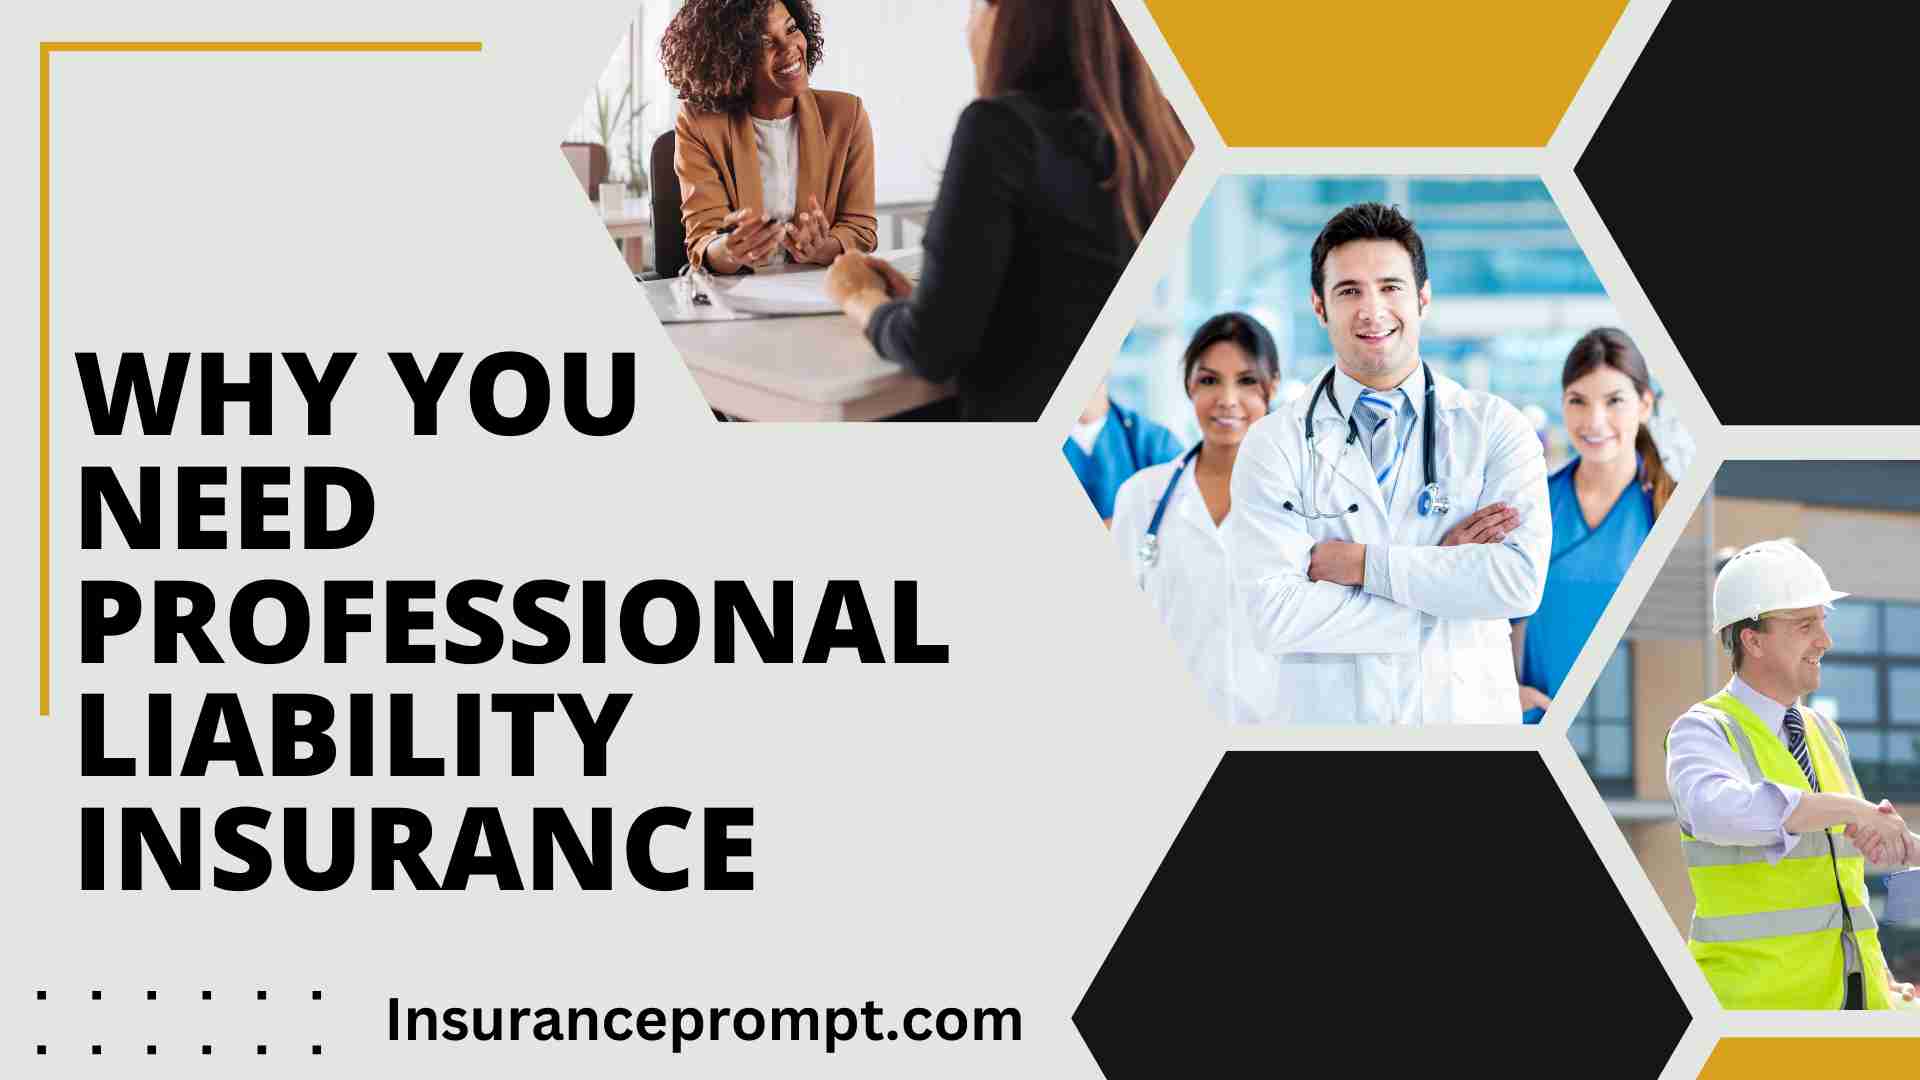 Why You Need Professional Liability Insurance